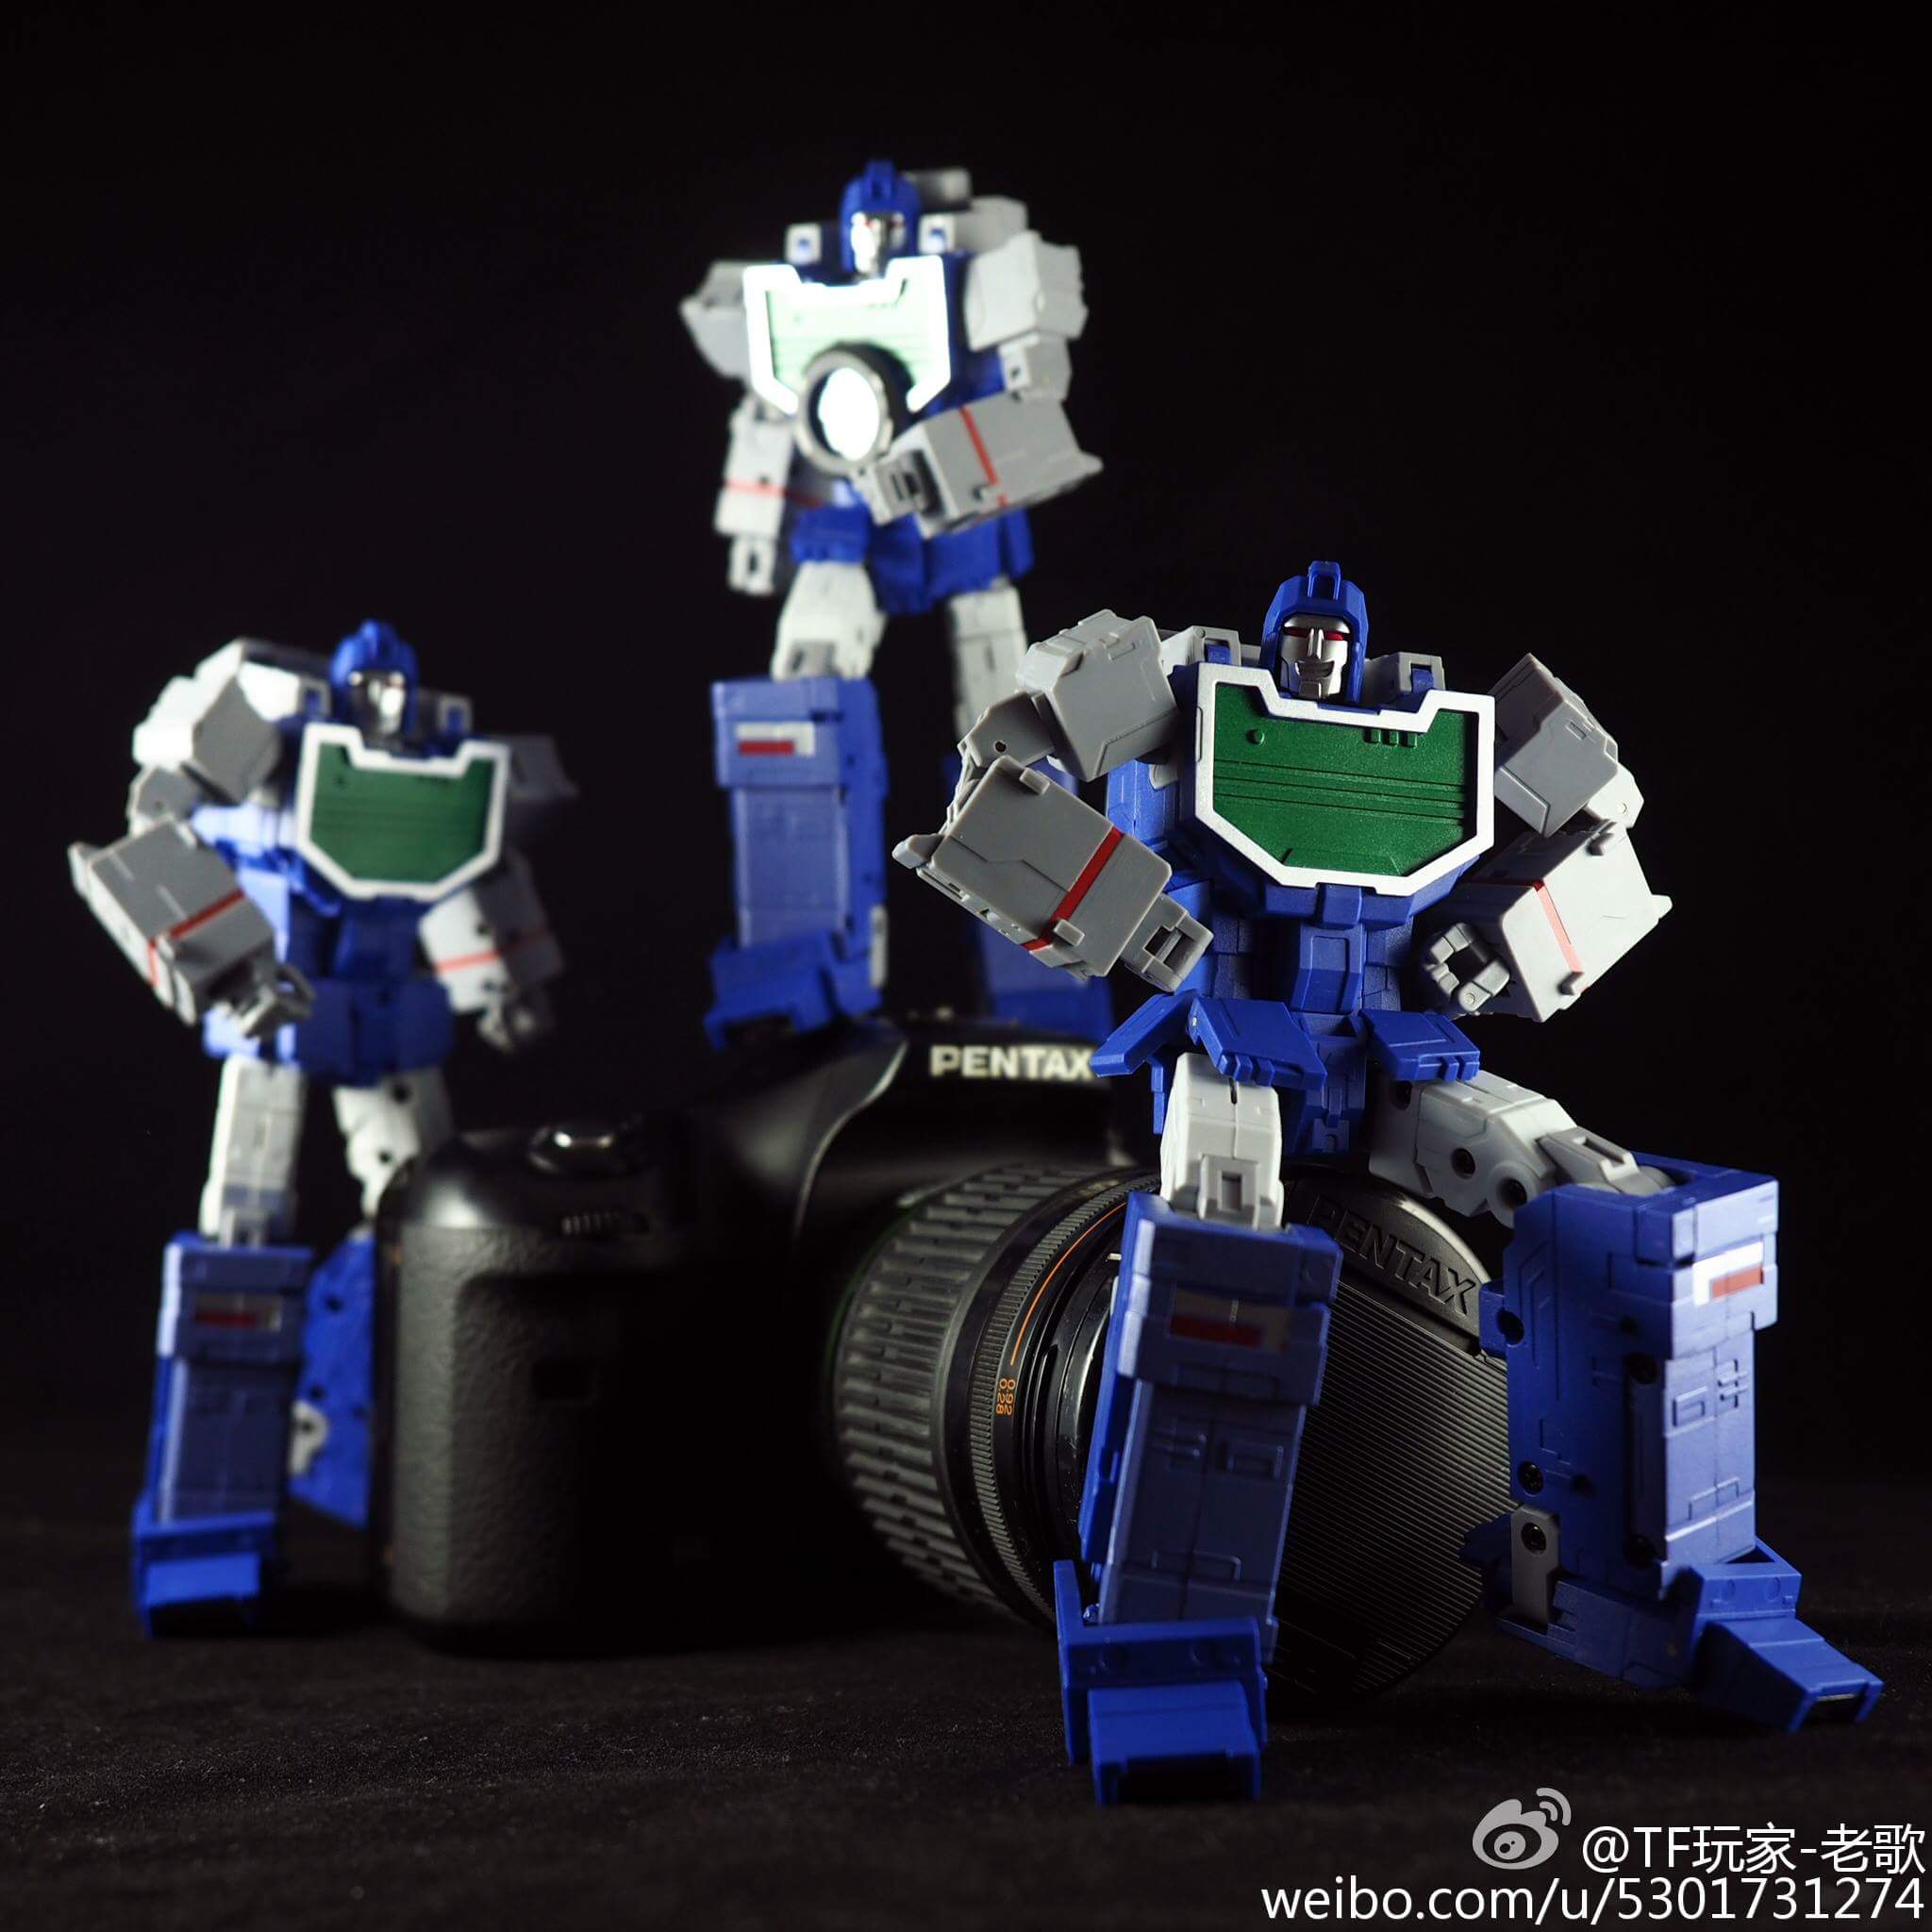 [Masterpiece Tiers] FANSTOYS FT-11 SPOTTER aka REFLECTOR - Sortie Decembre 2015 - Page 3 Zgae7KV0